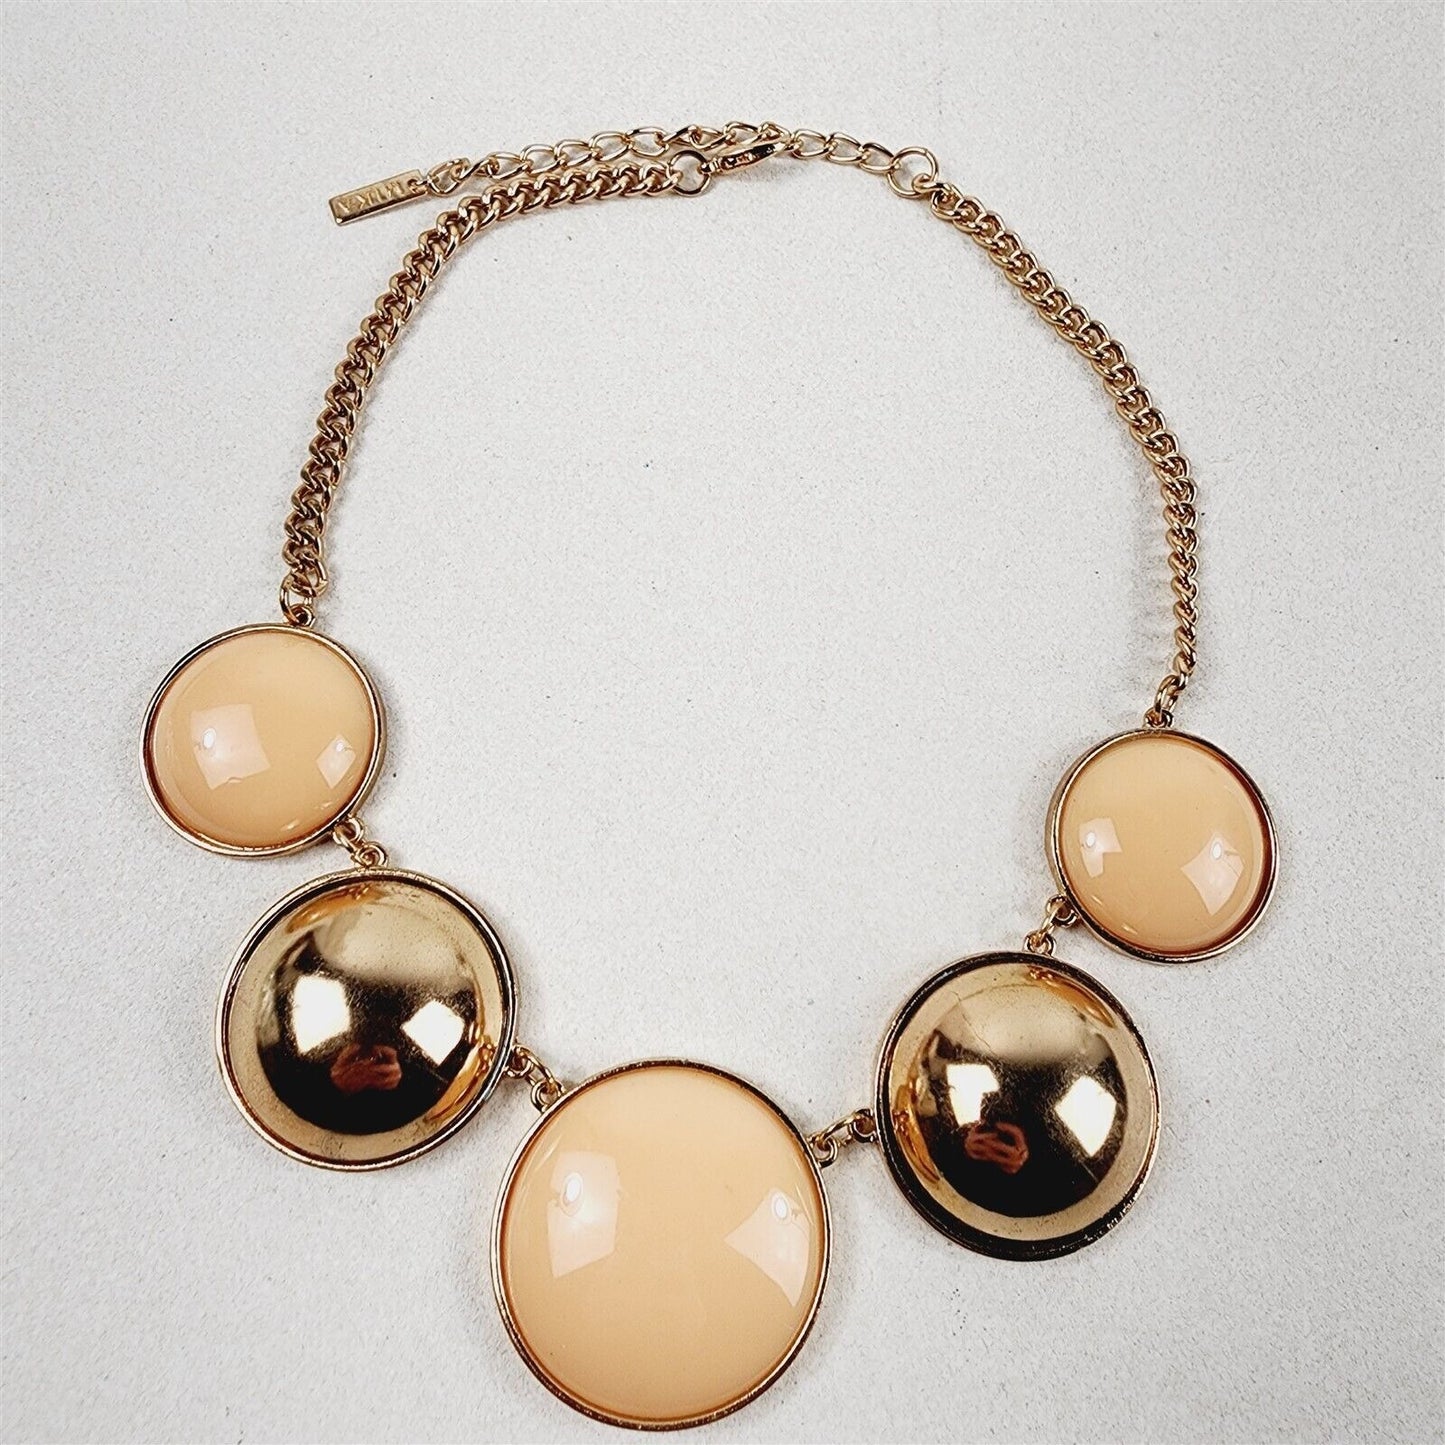 Gold & Pink Round Dome Necklace Earrings Fashion Jewelry Set